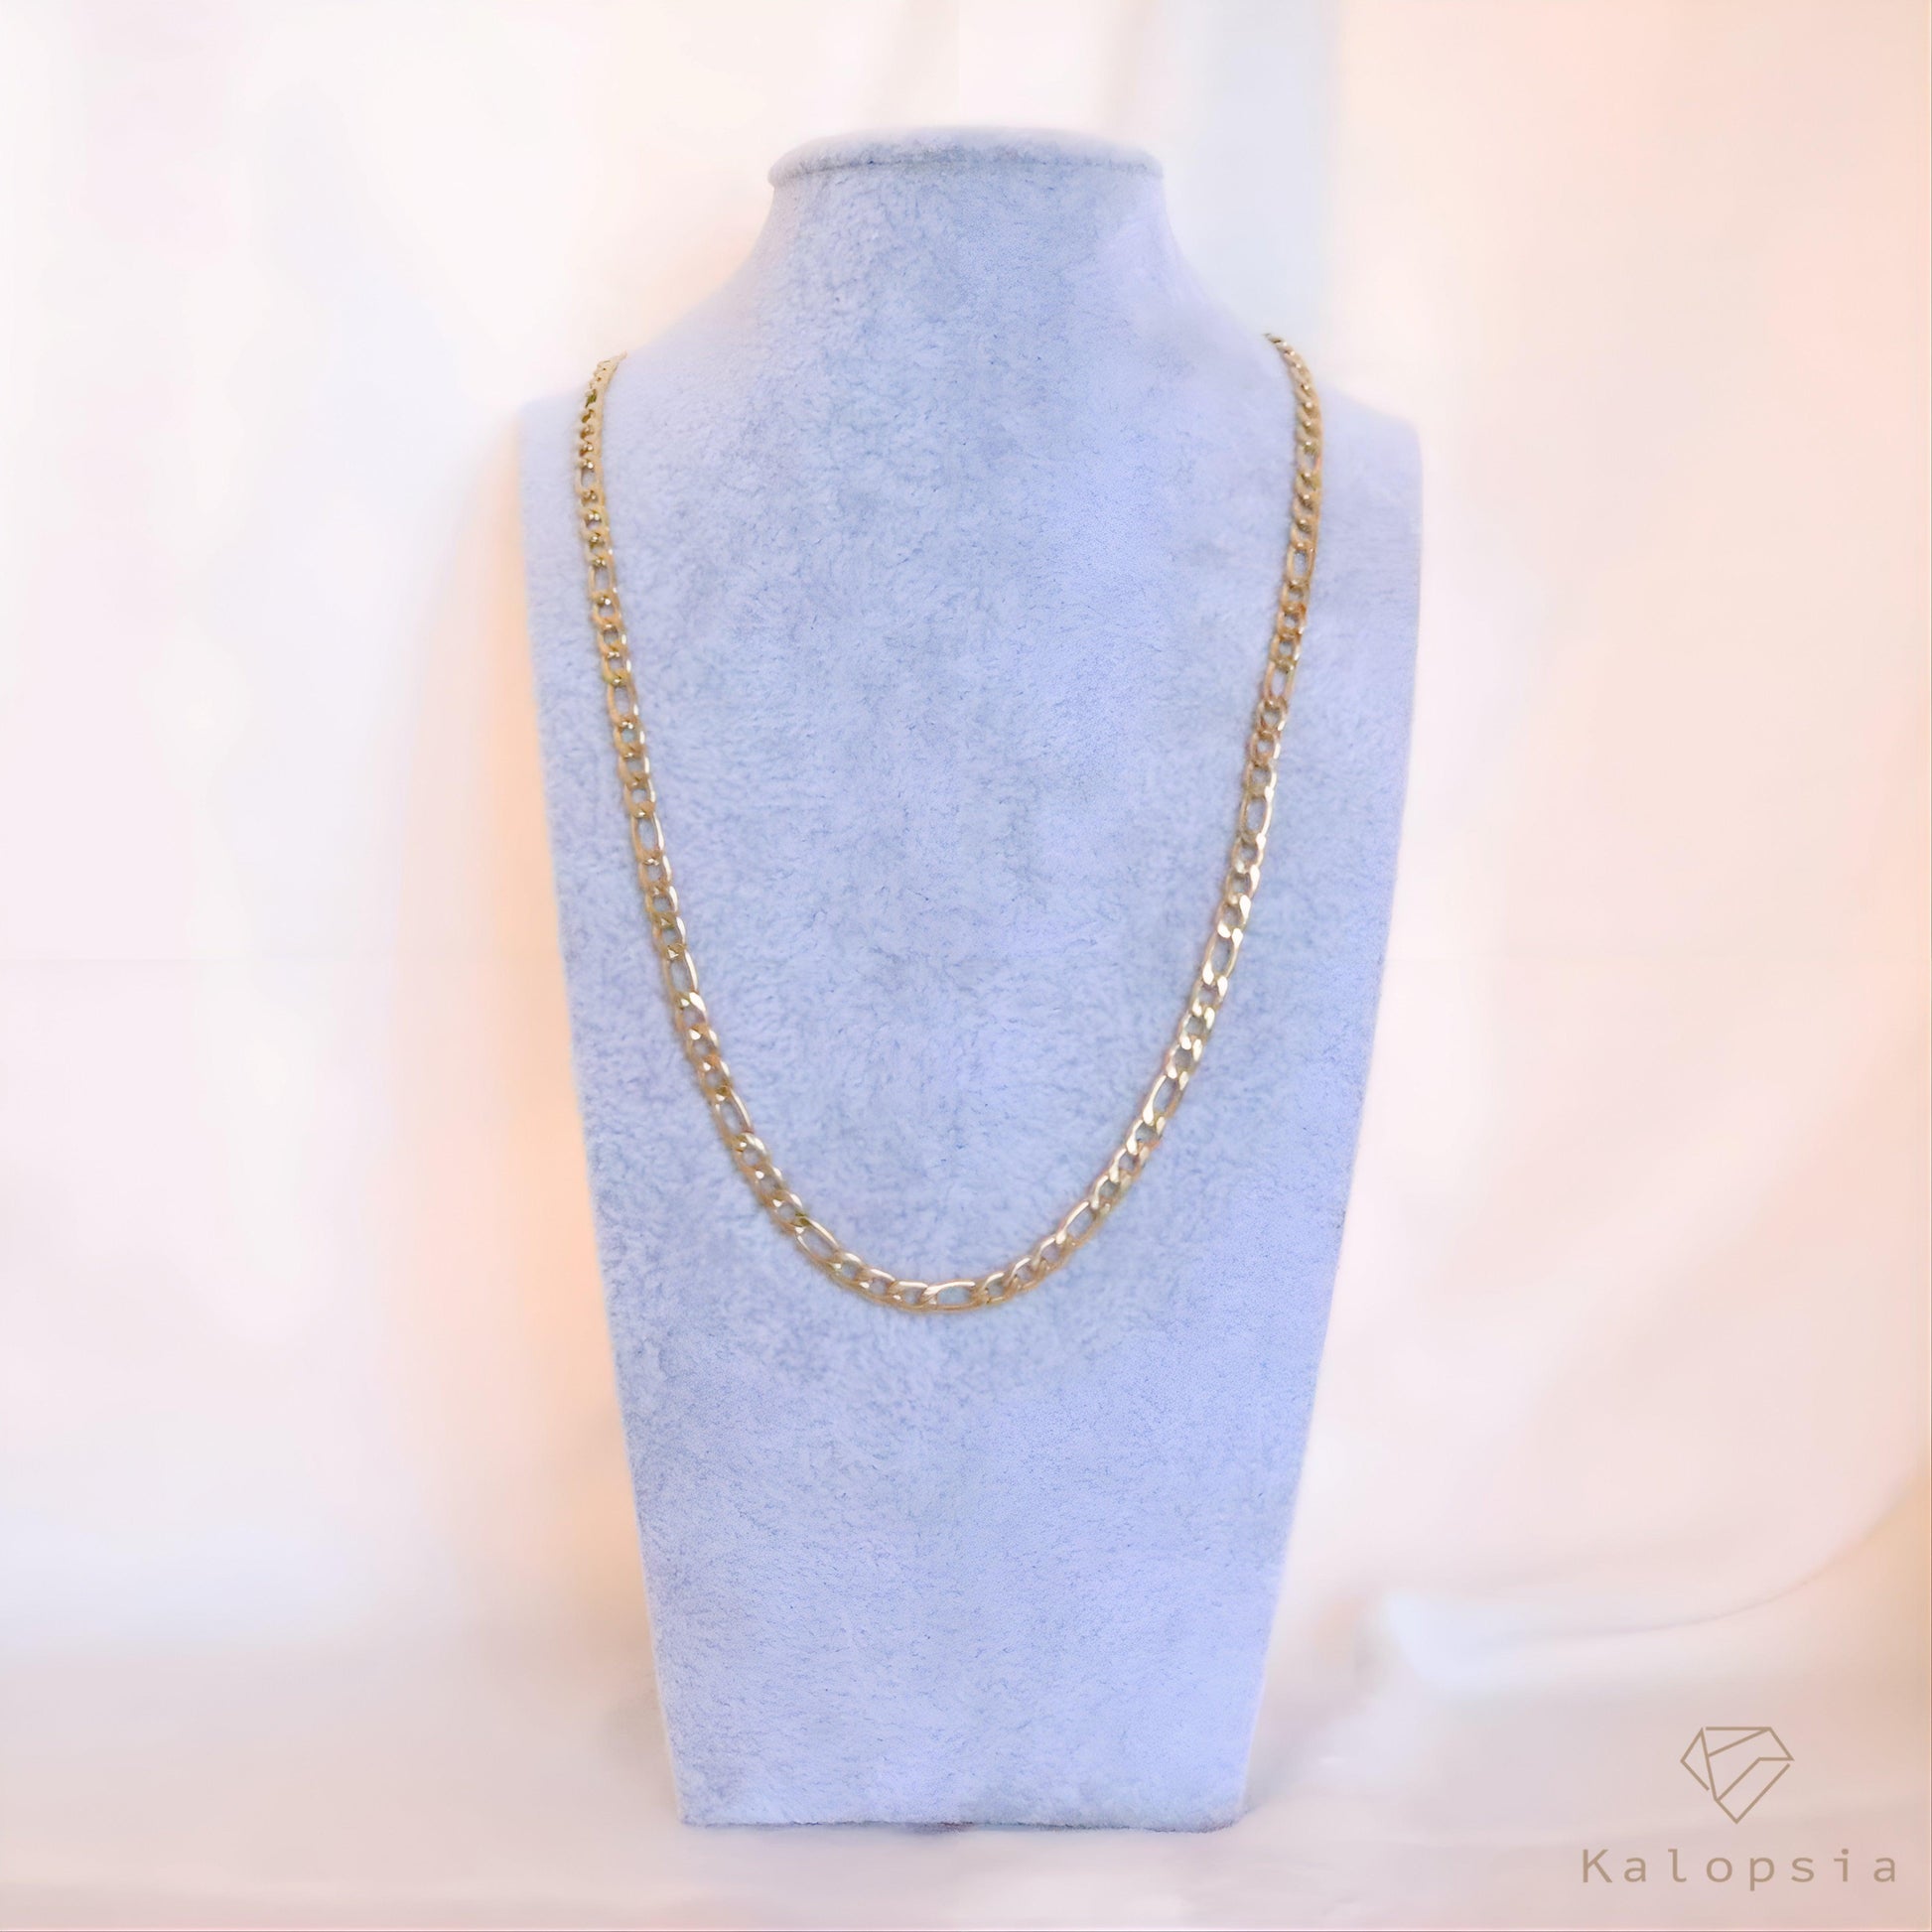 The Chain Necklace - Kalopsia Accessories